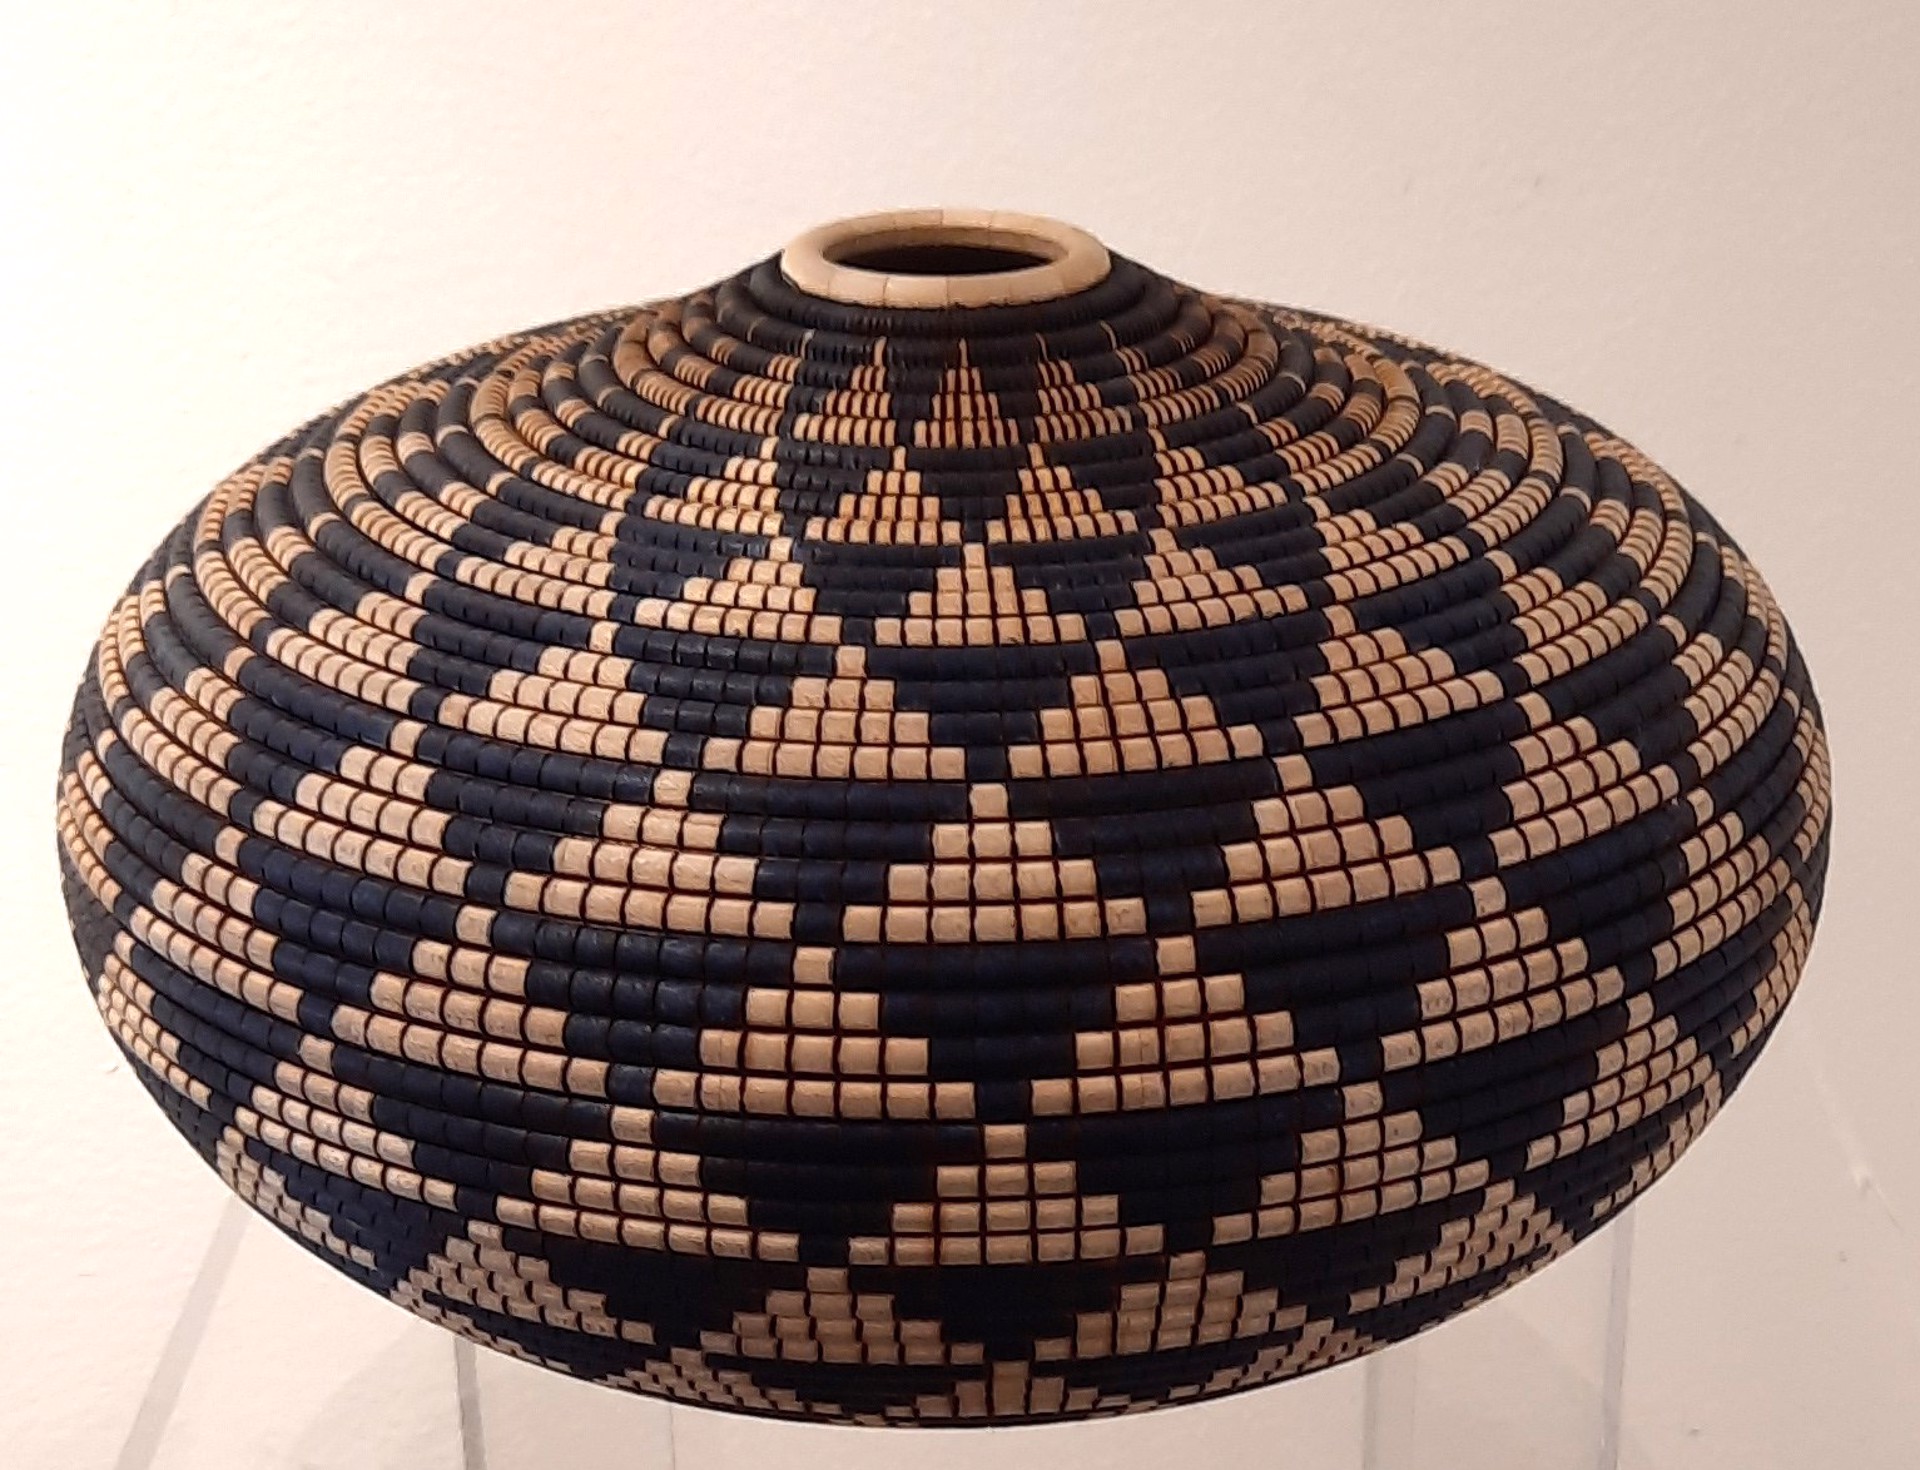 Dragonfly – Basket Weave Bowl by Michael Earley